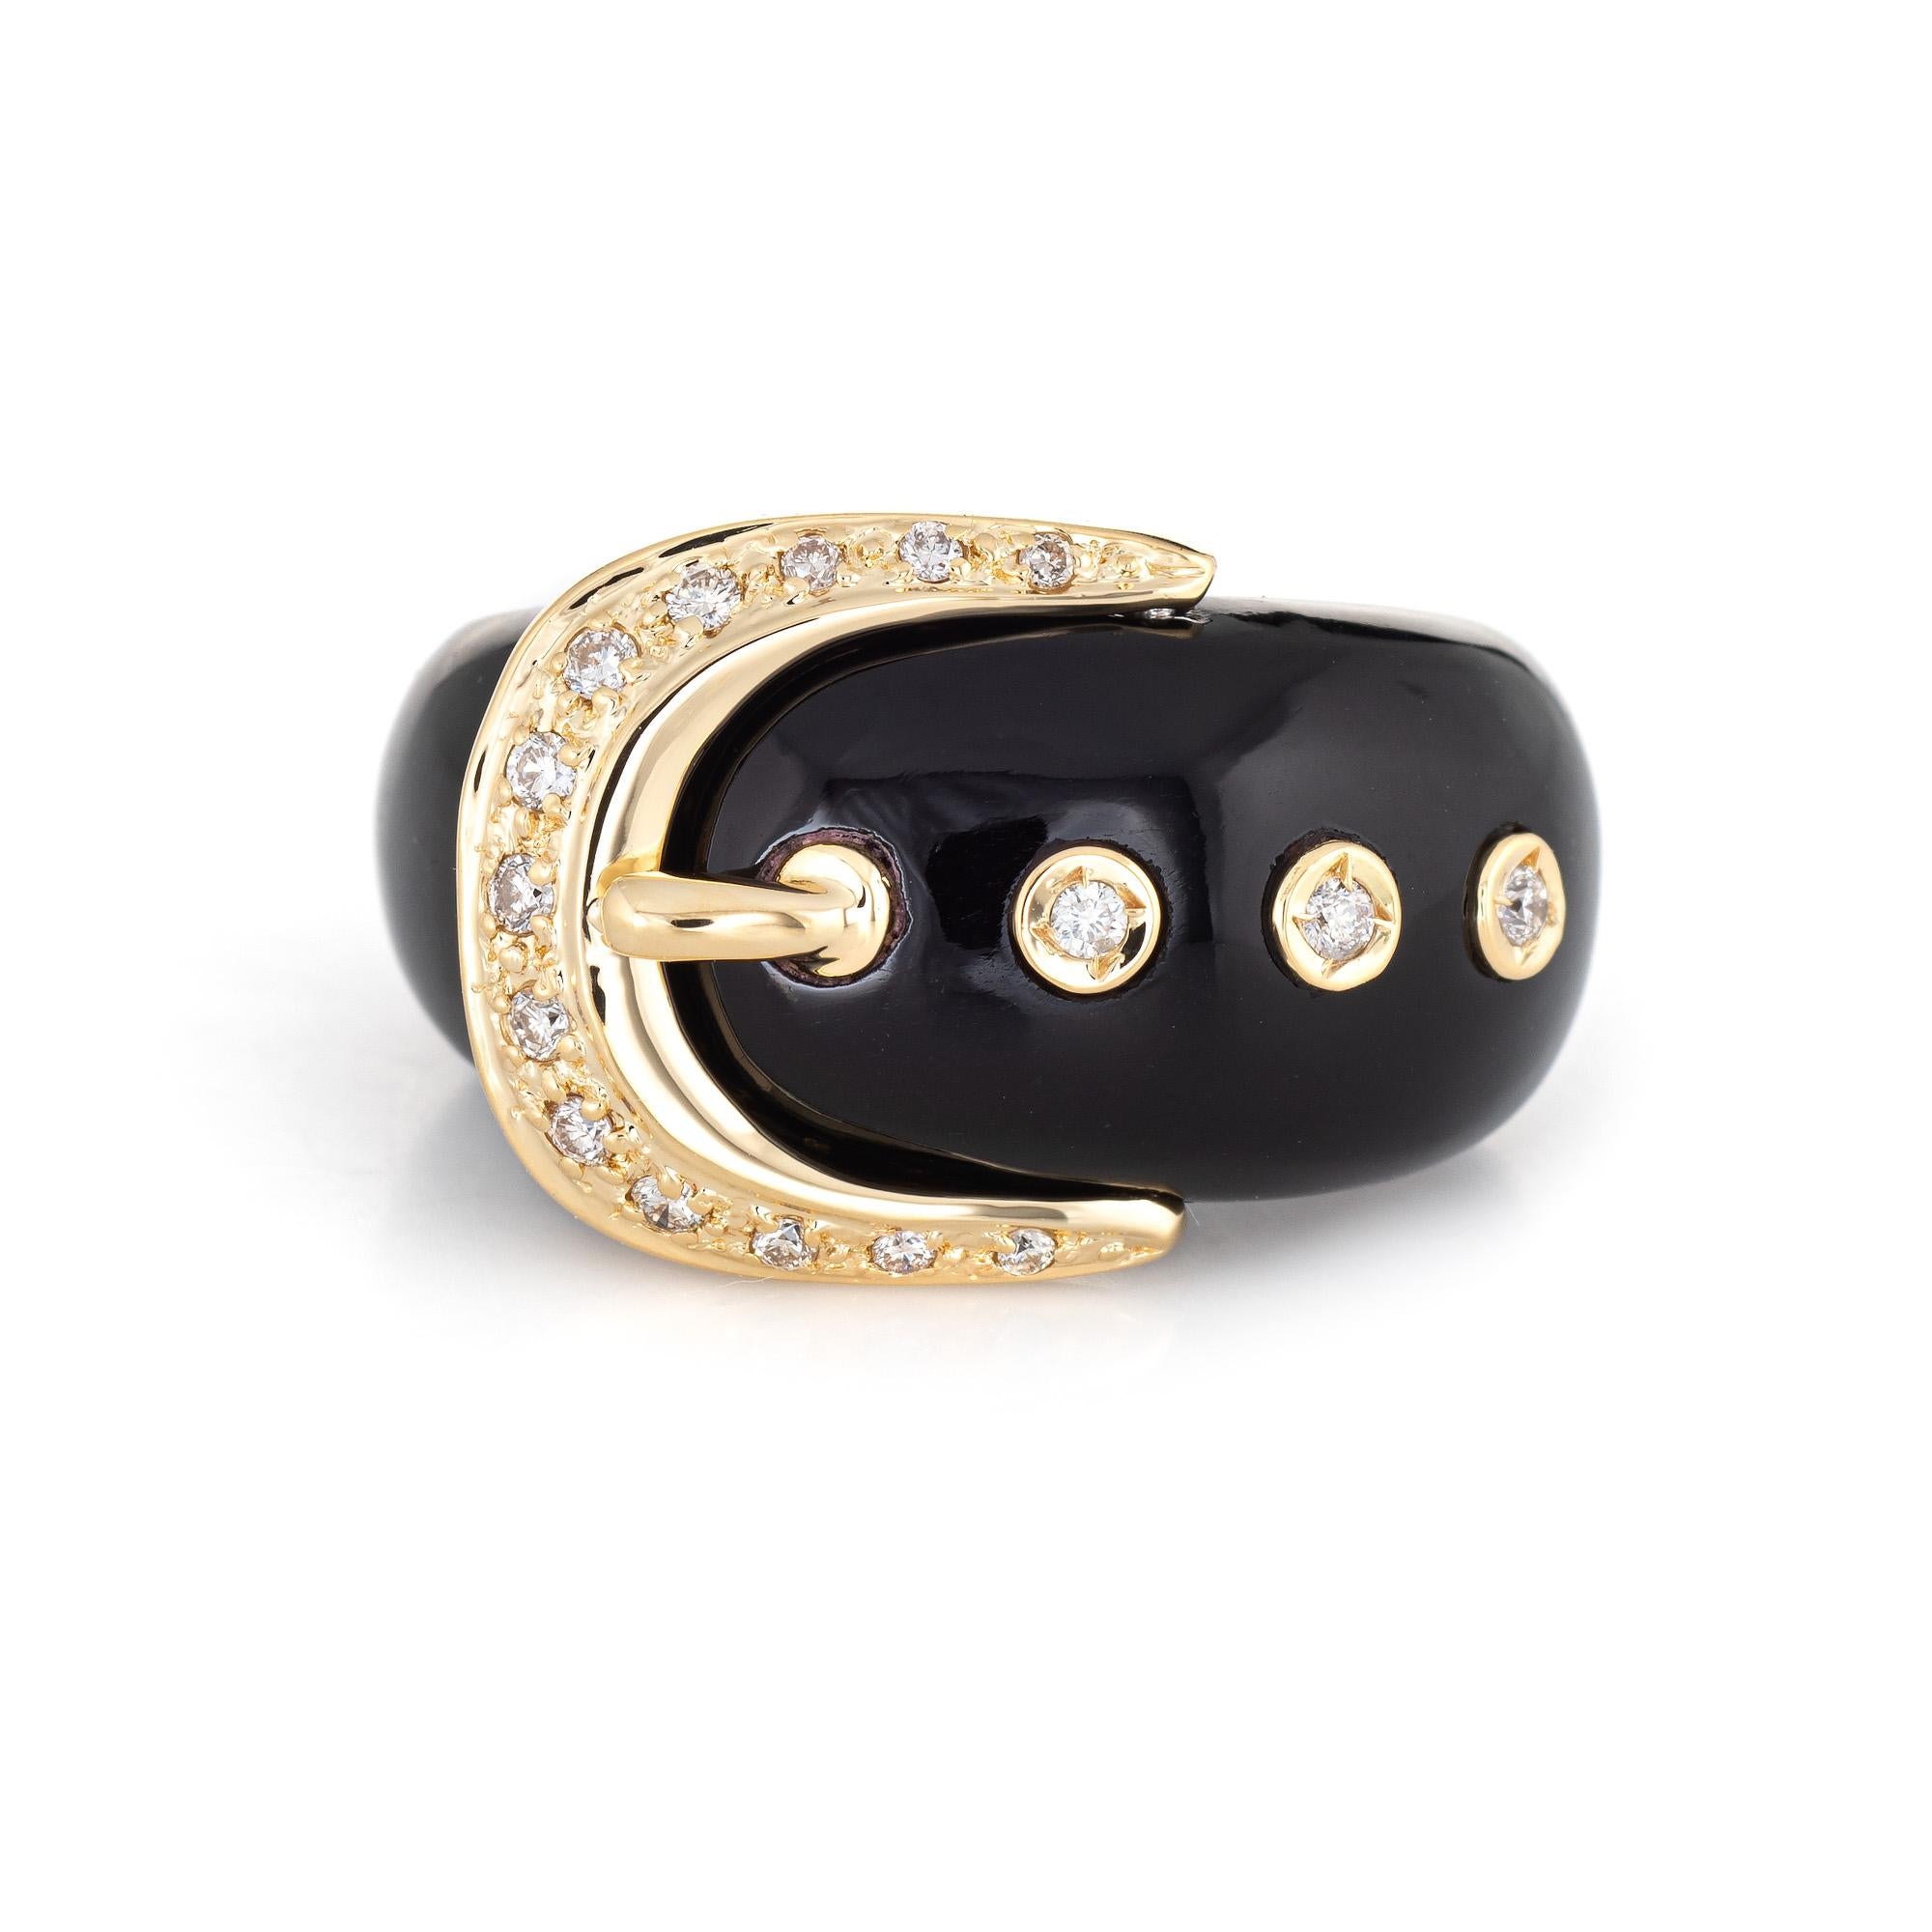 Stylish black resin diamond buckle ring crafted in 18 karat yellow gold. 

Diamonds total an estimated 0.16 carats (estimated at I-J color and SI1-I1 clarity). 

The black resin band is set with diamonds in 18k yellow gold. The buckle is a symbol of